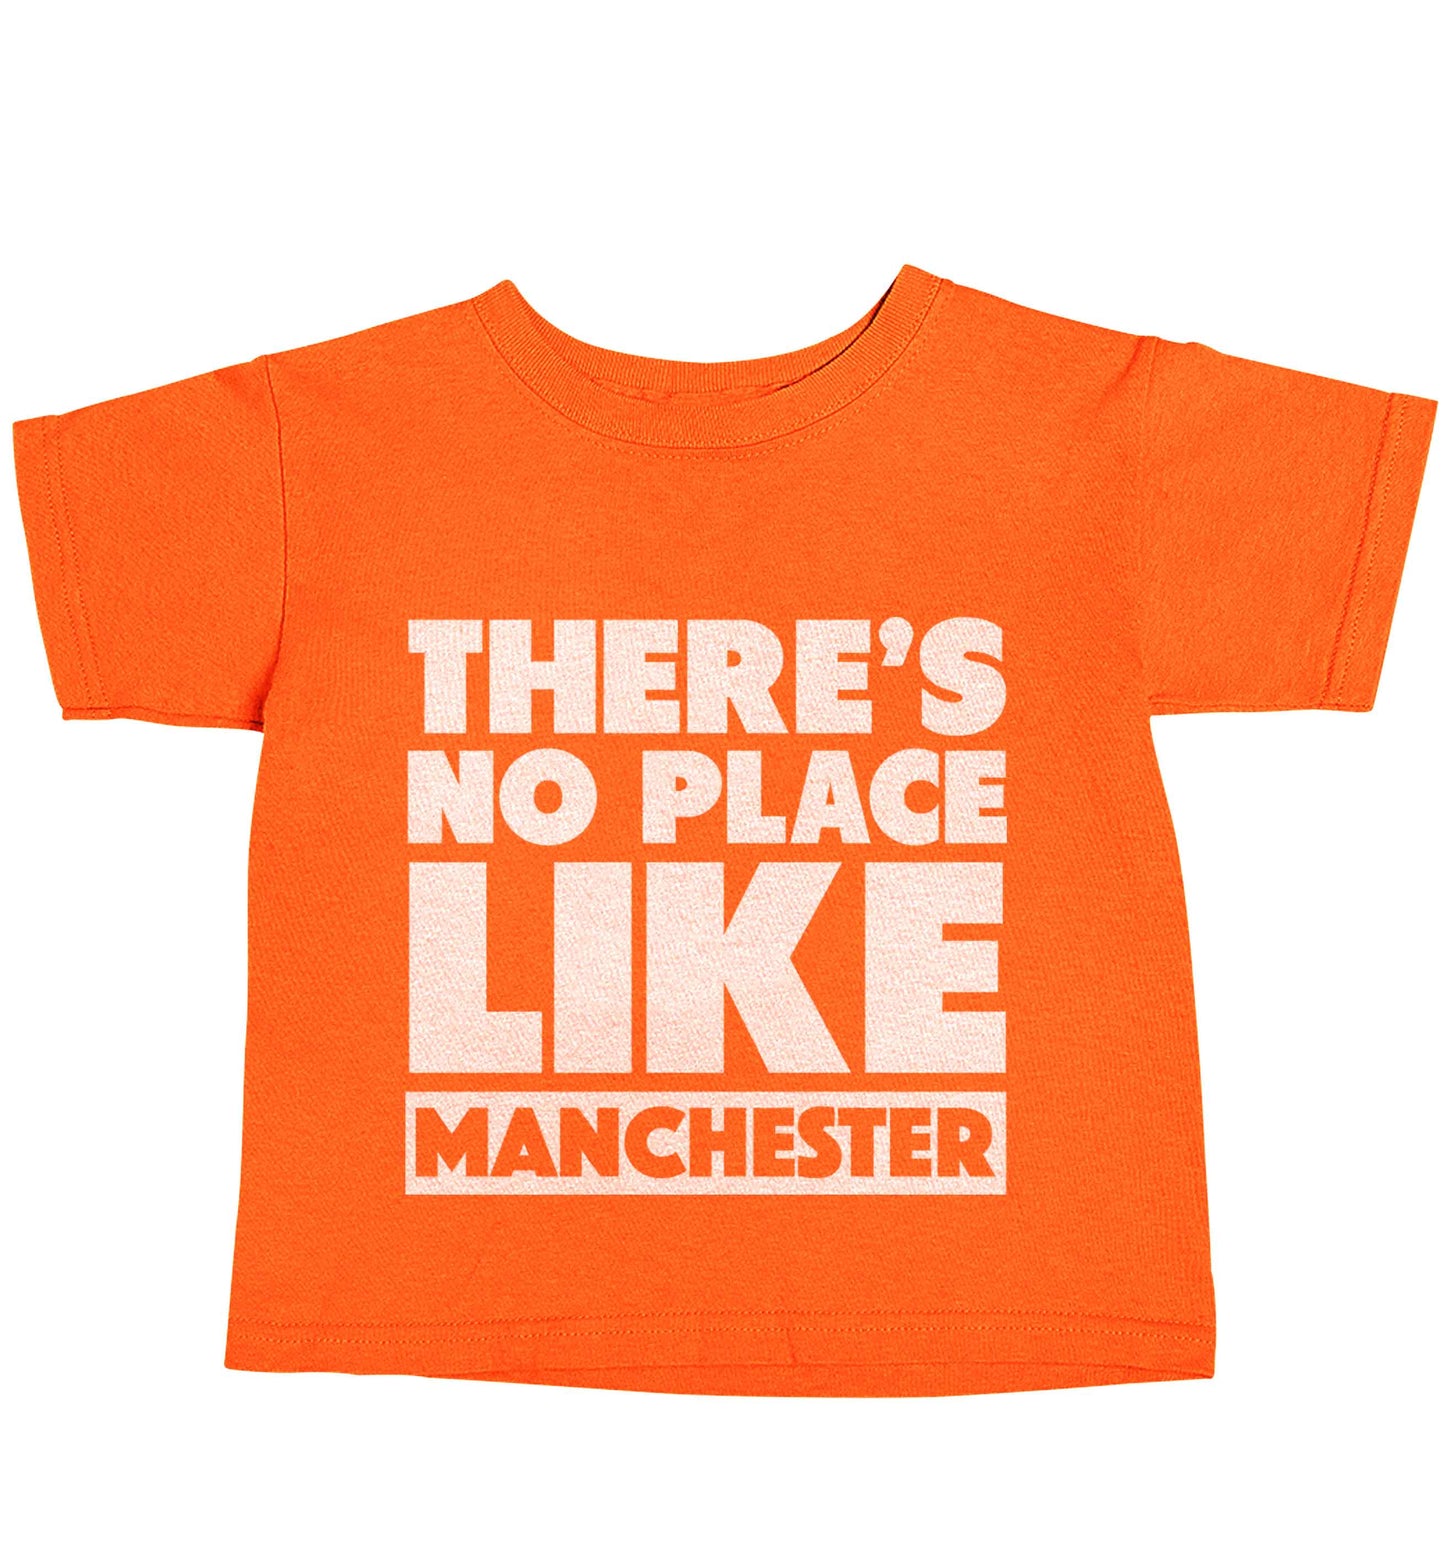 There's no place like Manchester orange baby toddler Tshirt 2 Years